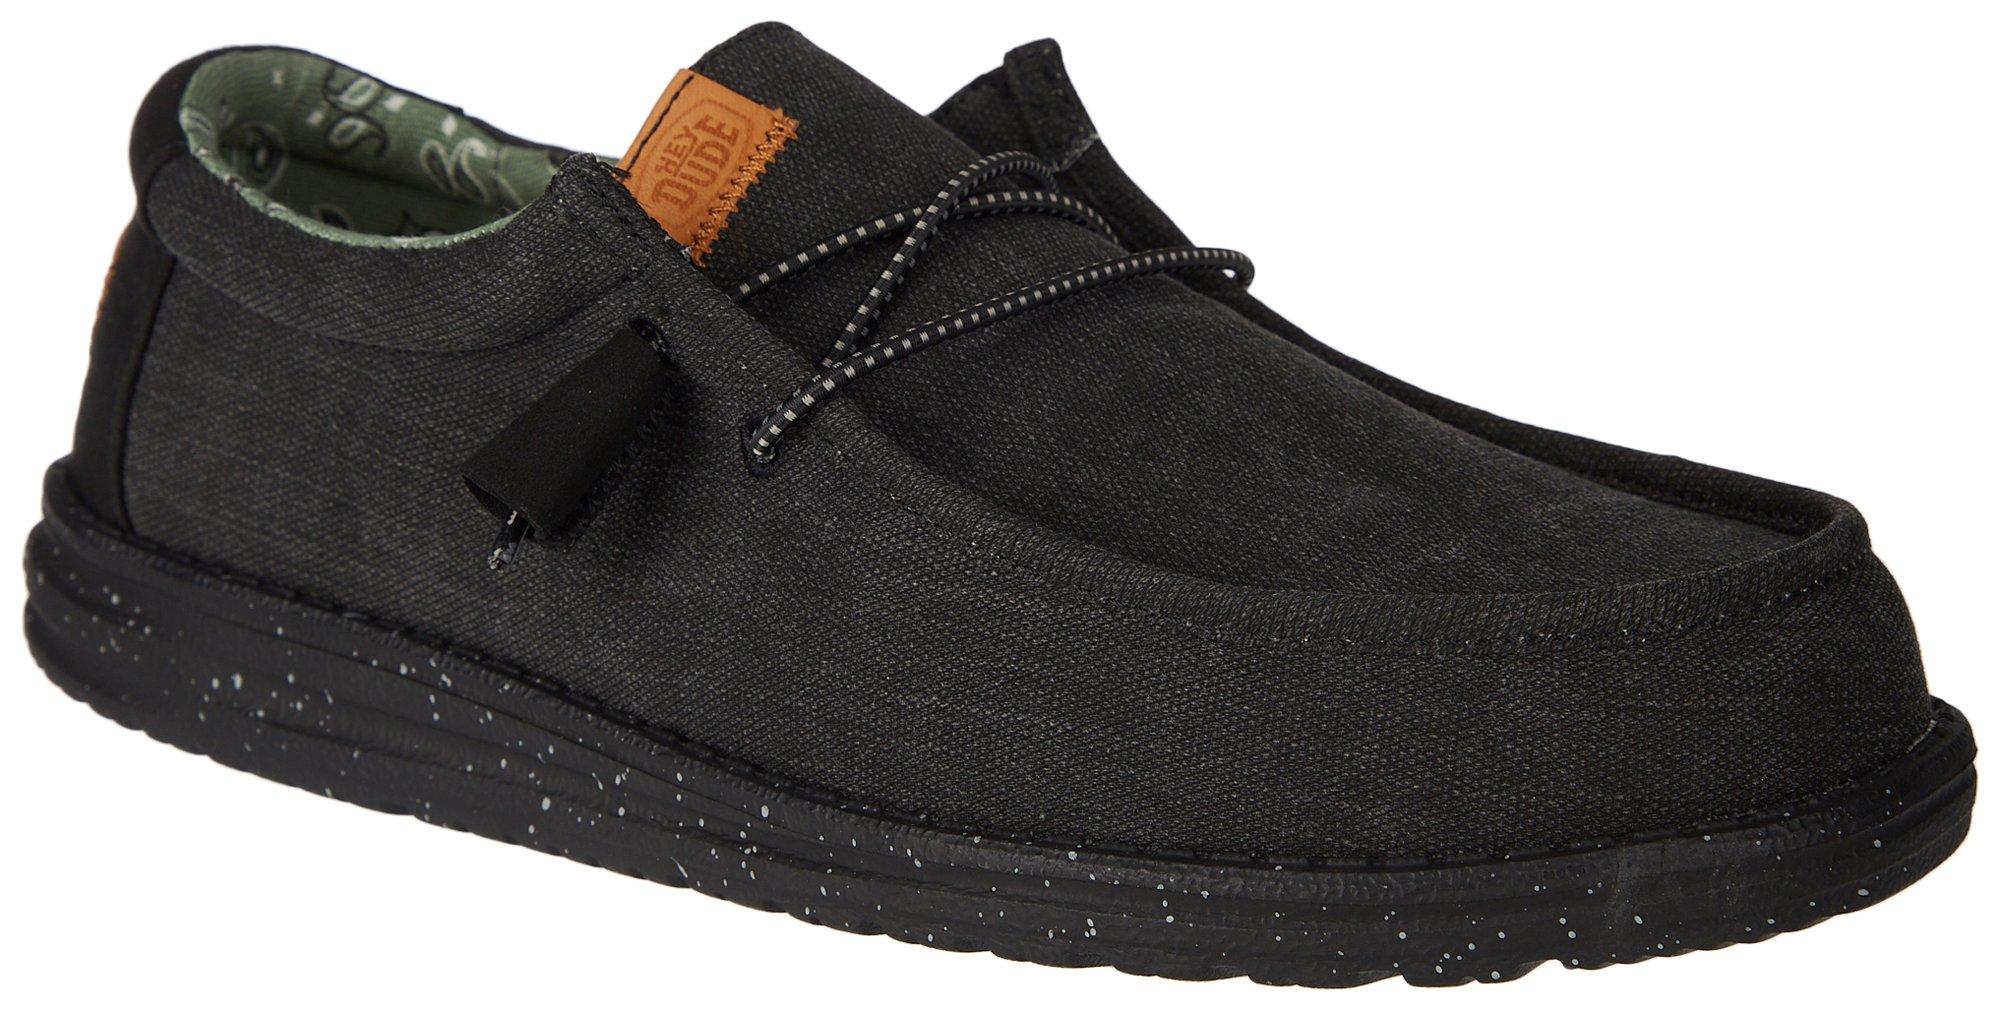 Mens Wally Washed Canvas Slip On Shoe